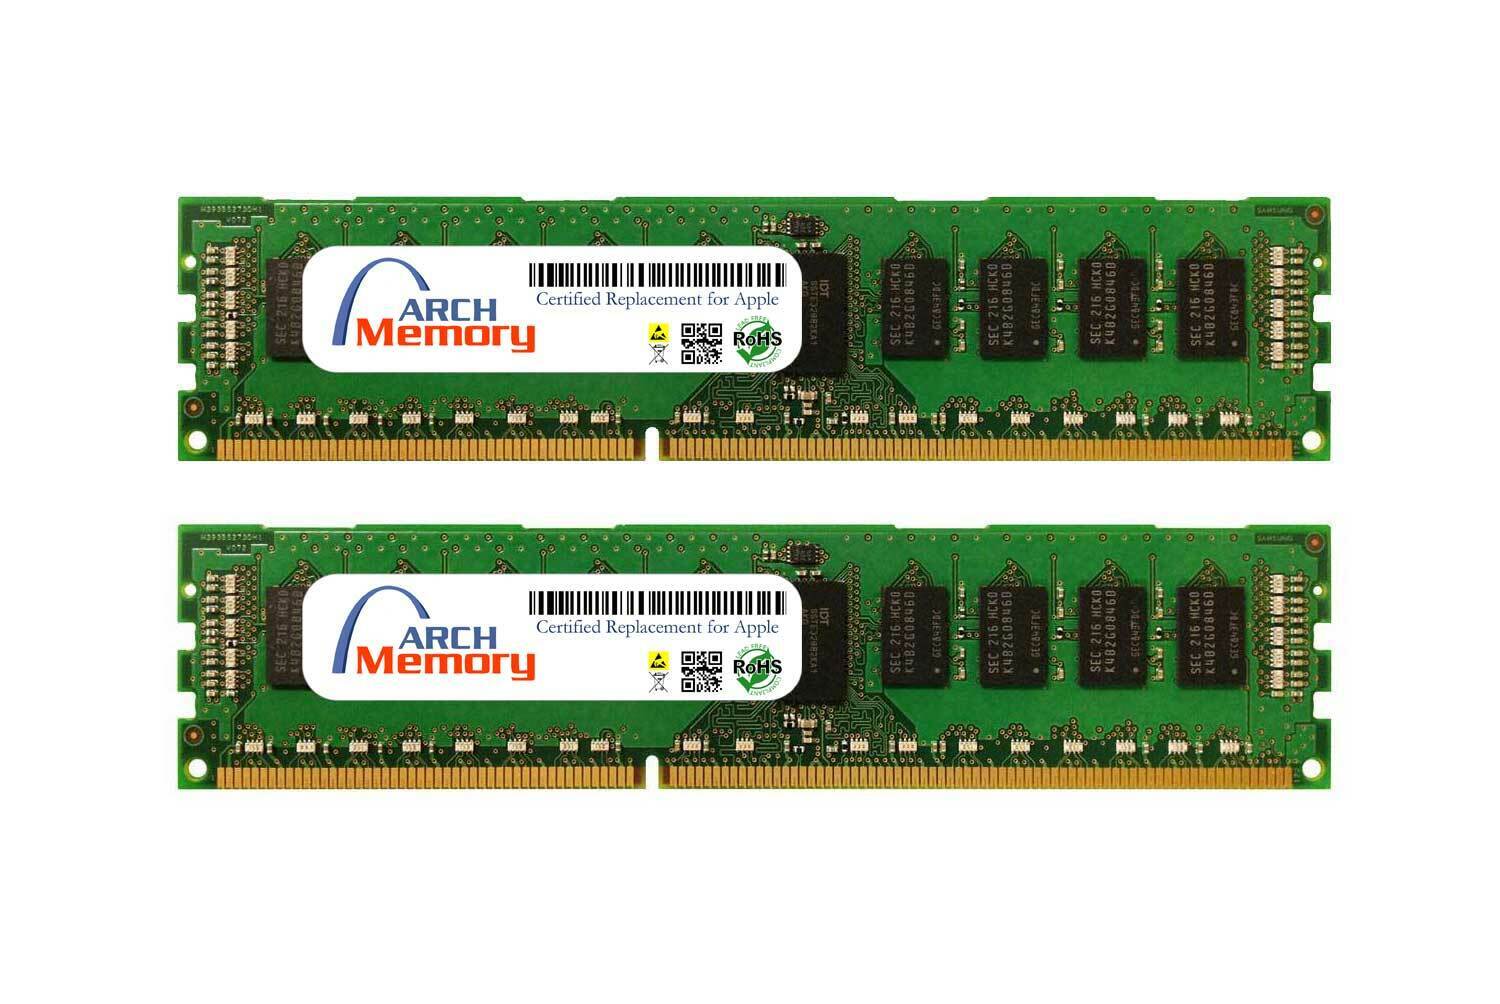 MD878B/A (2x8GB) Certified Memory for Apple Mac Pro 6-core 3.5GHz Late 2013-2016